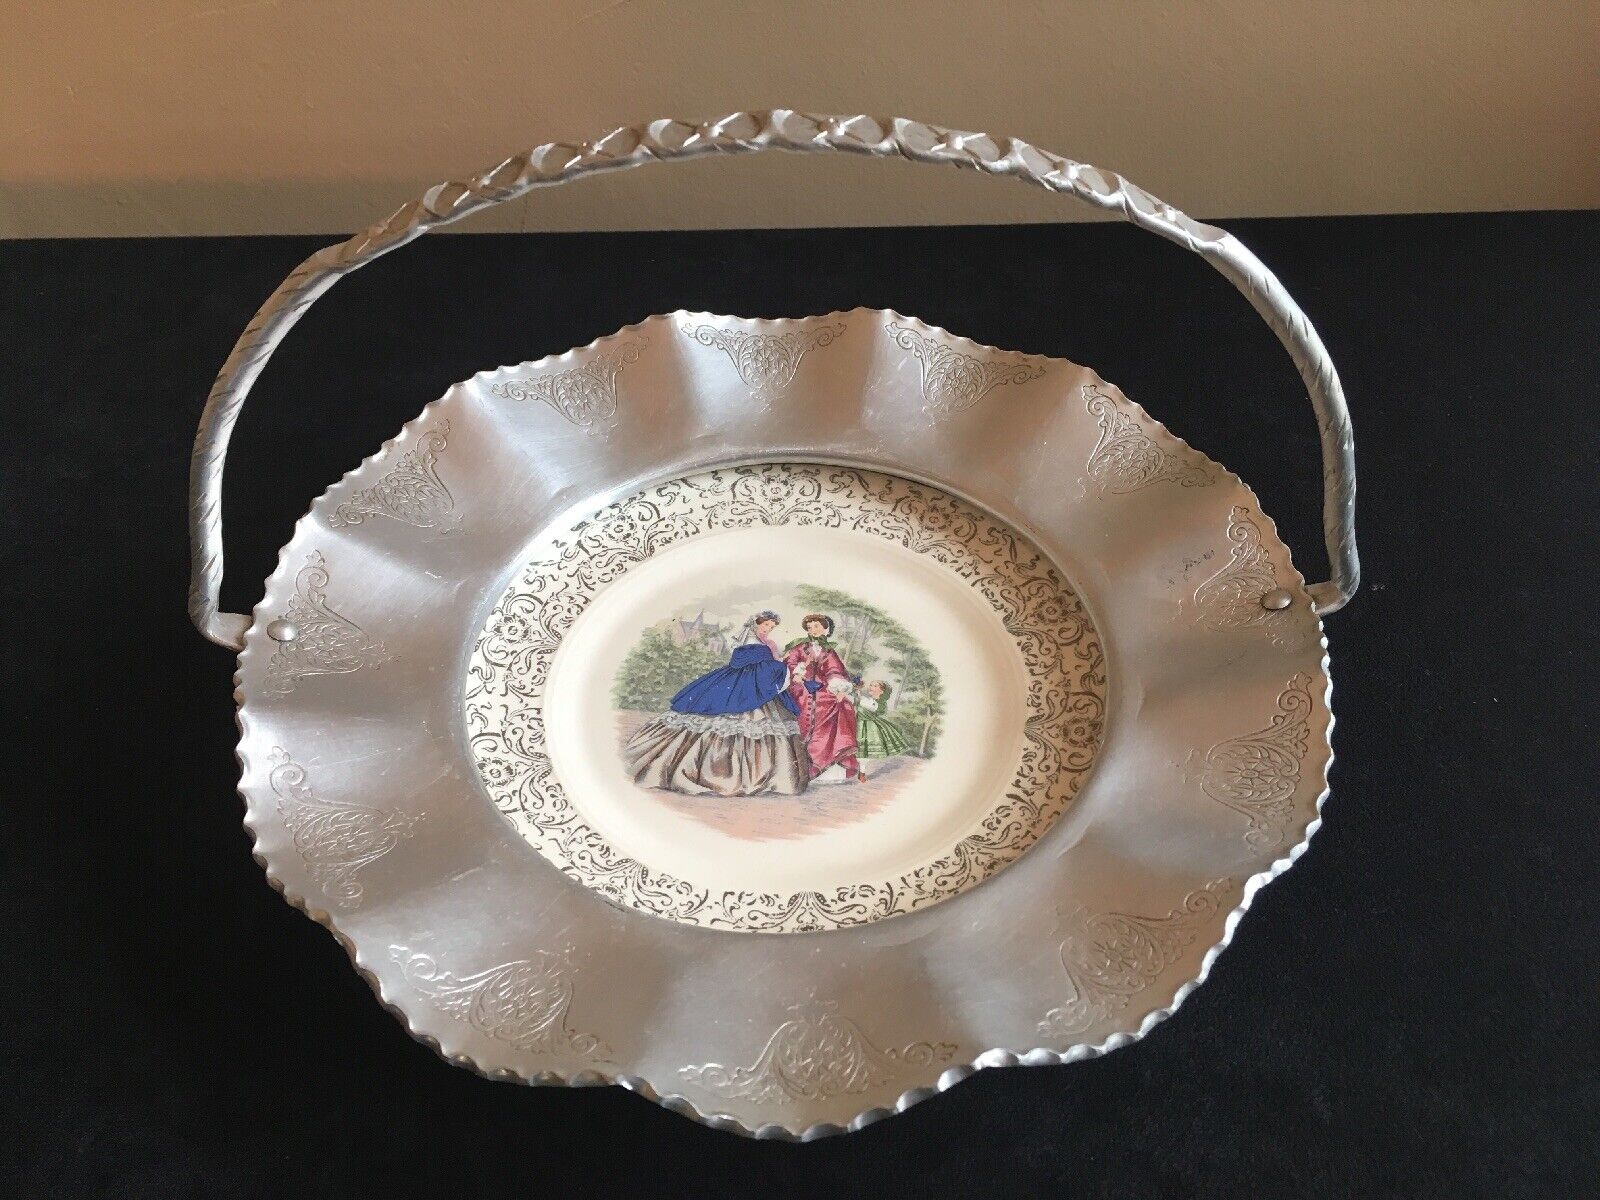 Farber & Shlevin Aluminum Handled Tray w/Porcelain Inset of Victorian Ladies